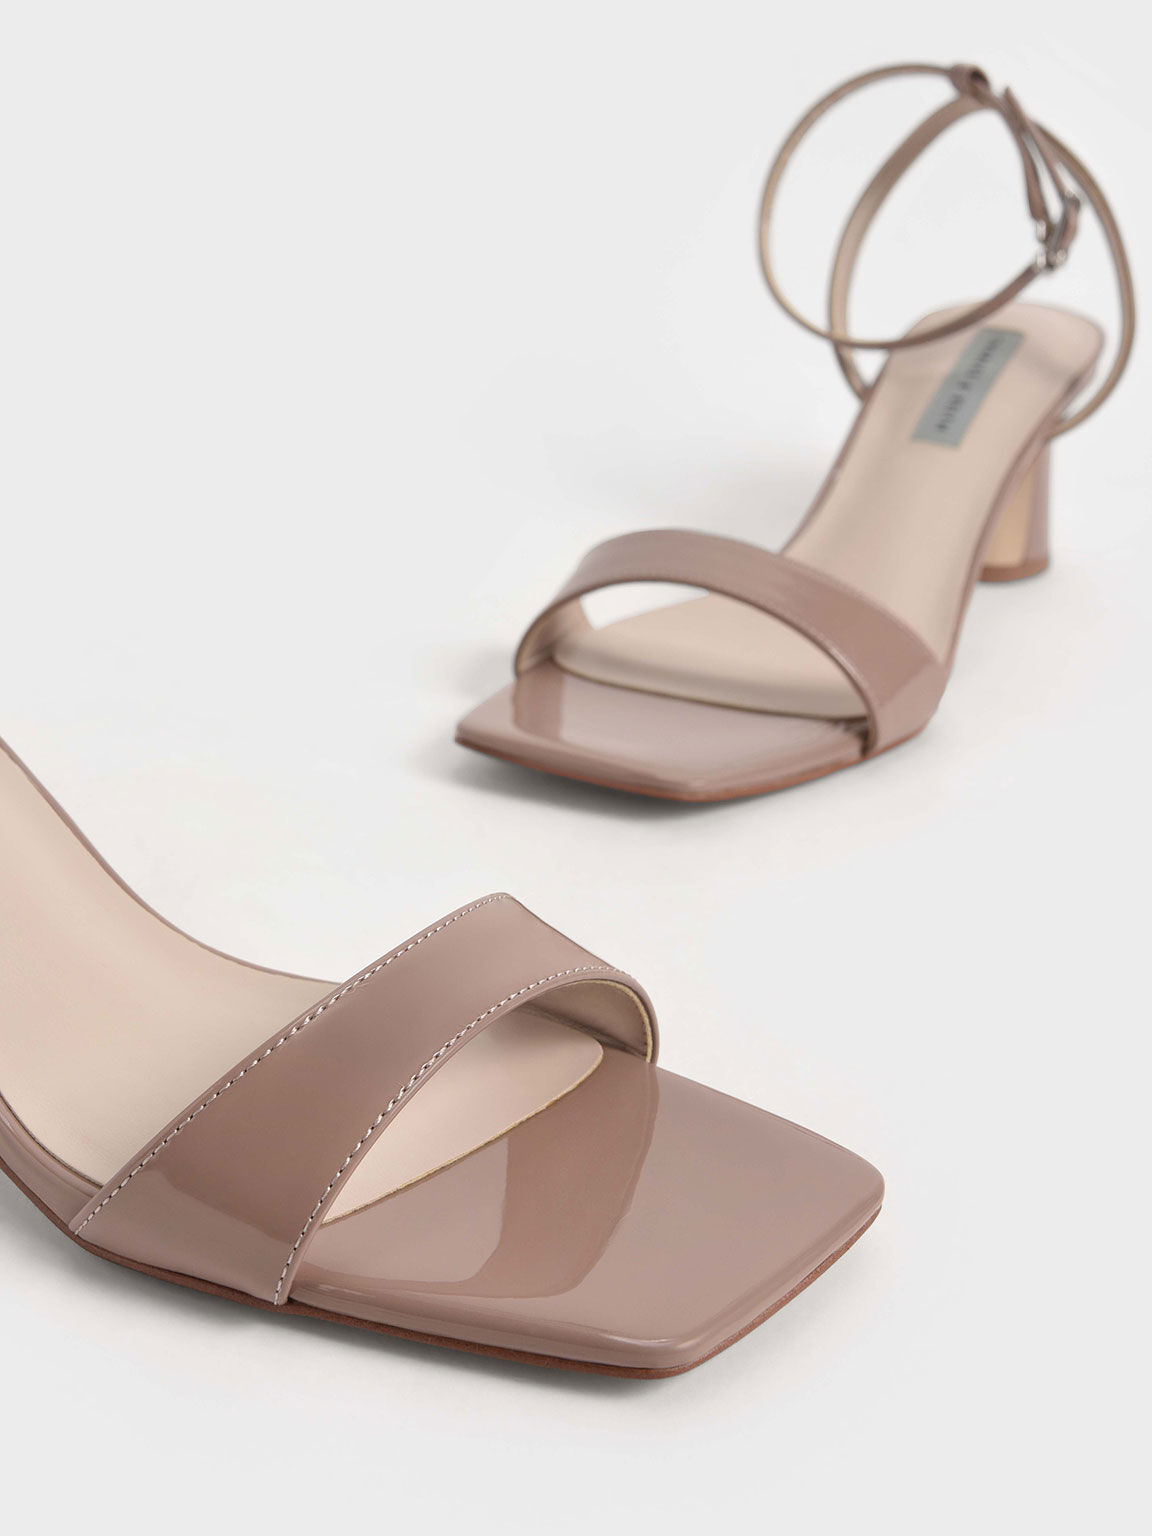 Patent Ankle-Strap Cylindrical Heel Sandals, Nude, hi-res